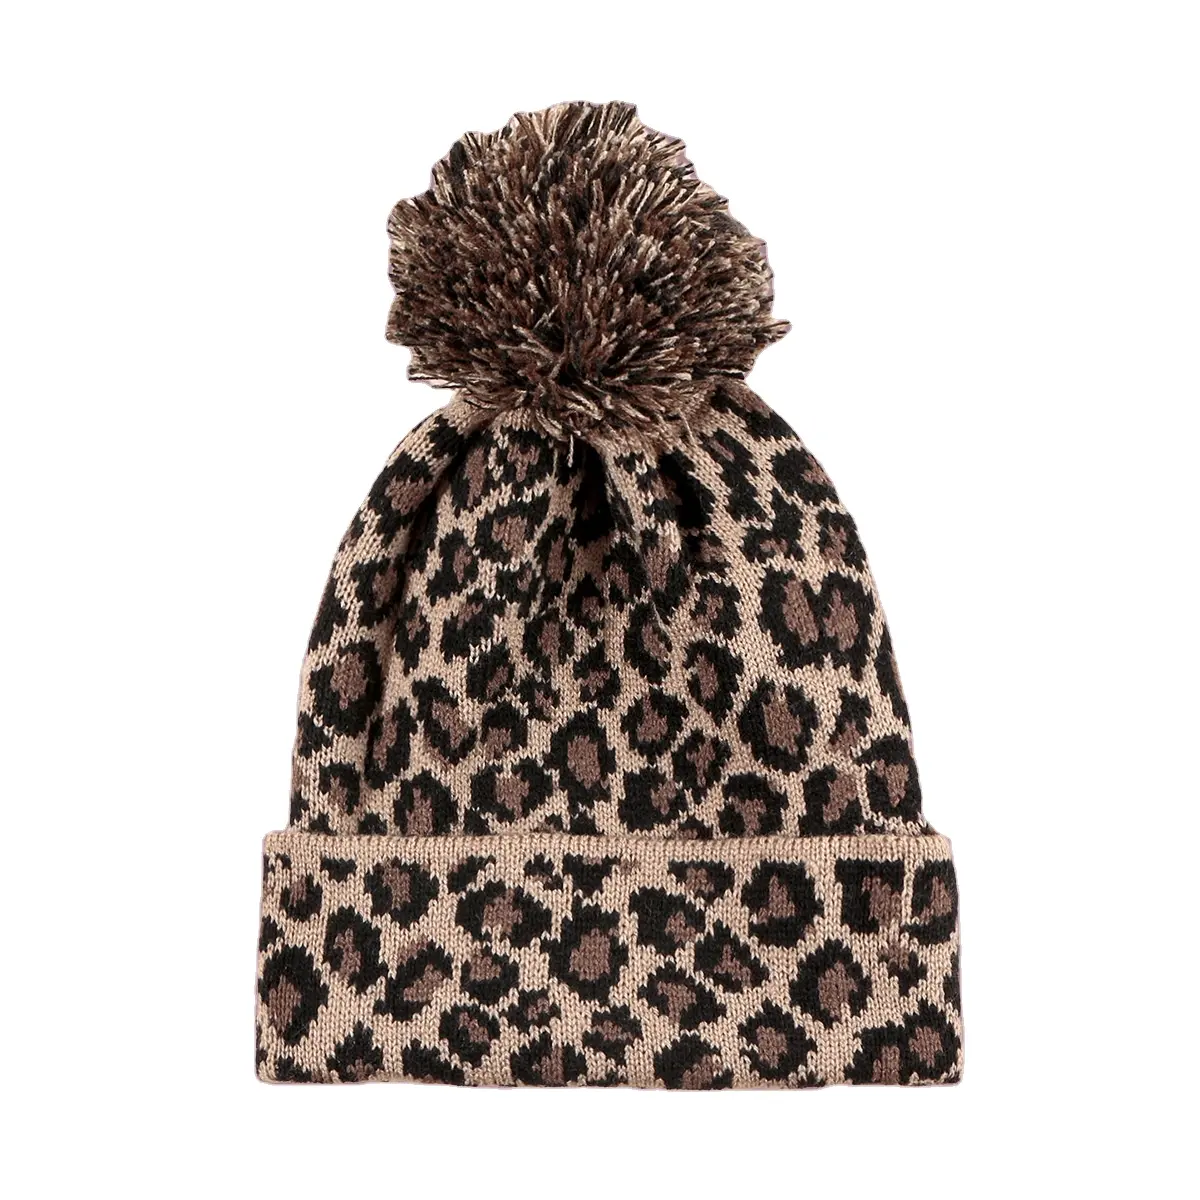 100% Acrylic Leopard Print Knitted Beanie Hat Winter With Ball of Yarn European and American Style